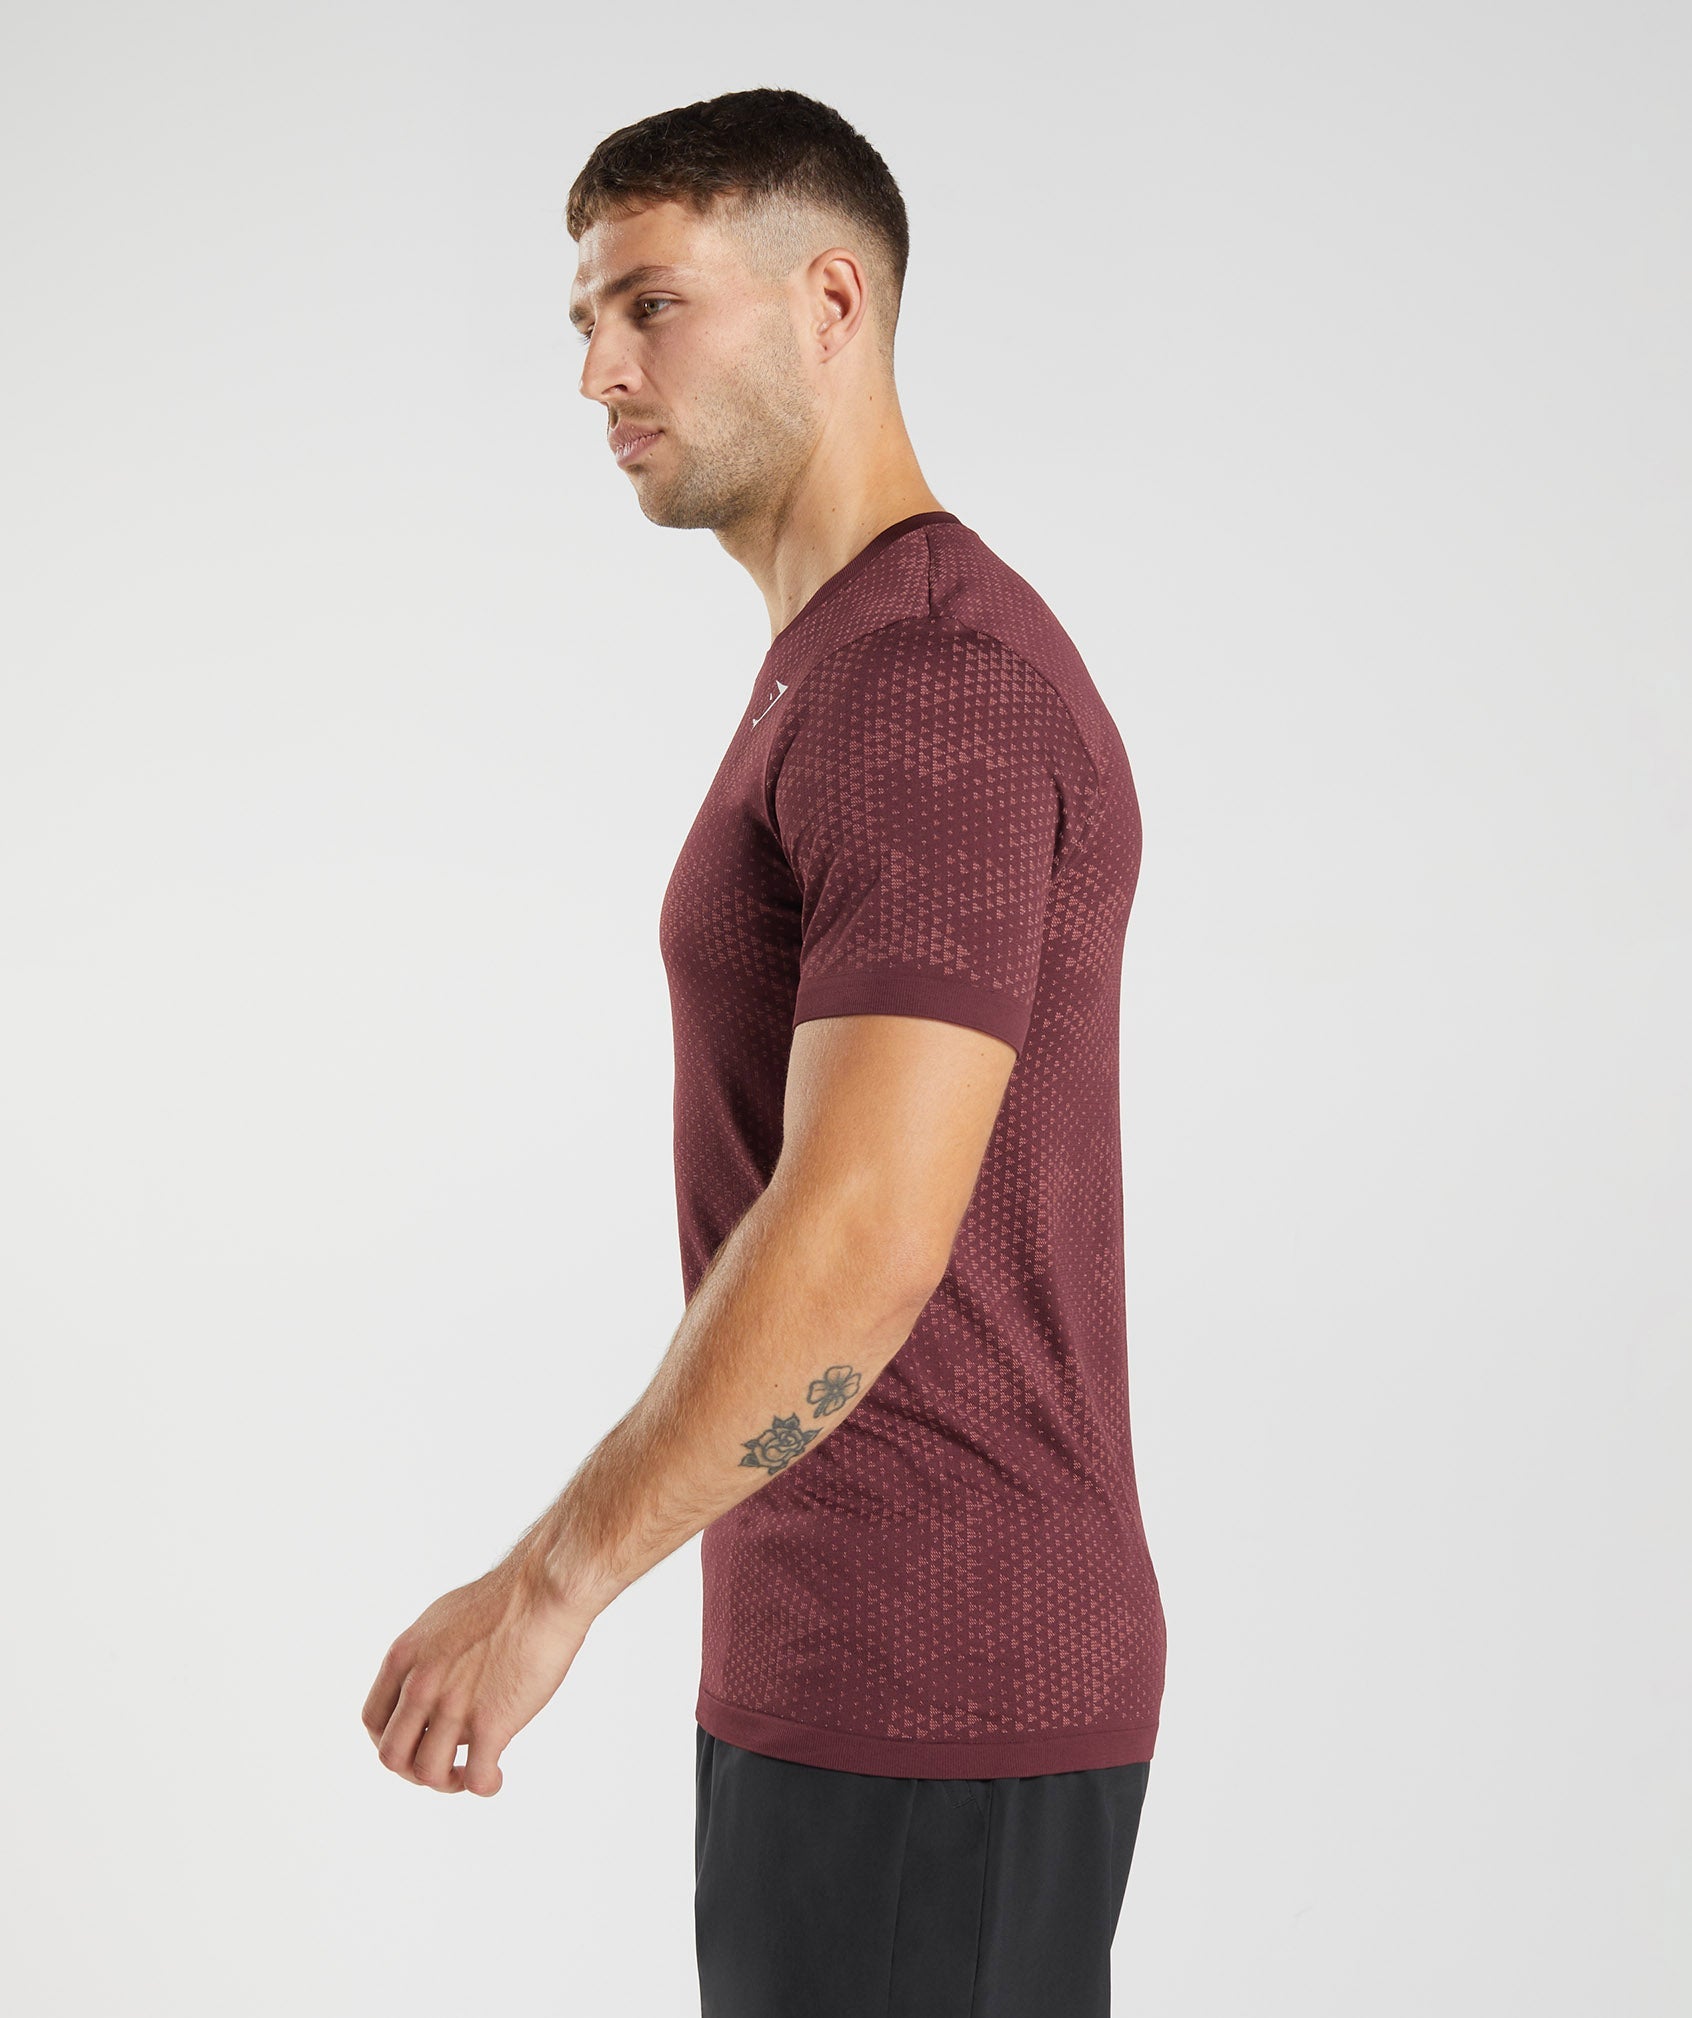 Sport Seamless T-Shirt in Baked Maroon/Rosewood Red - view 3